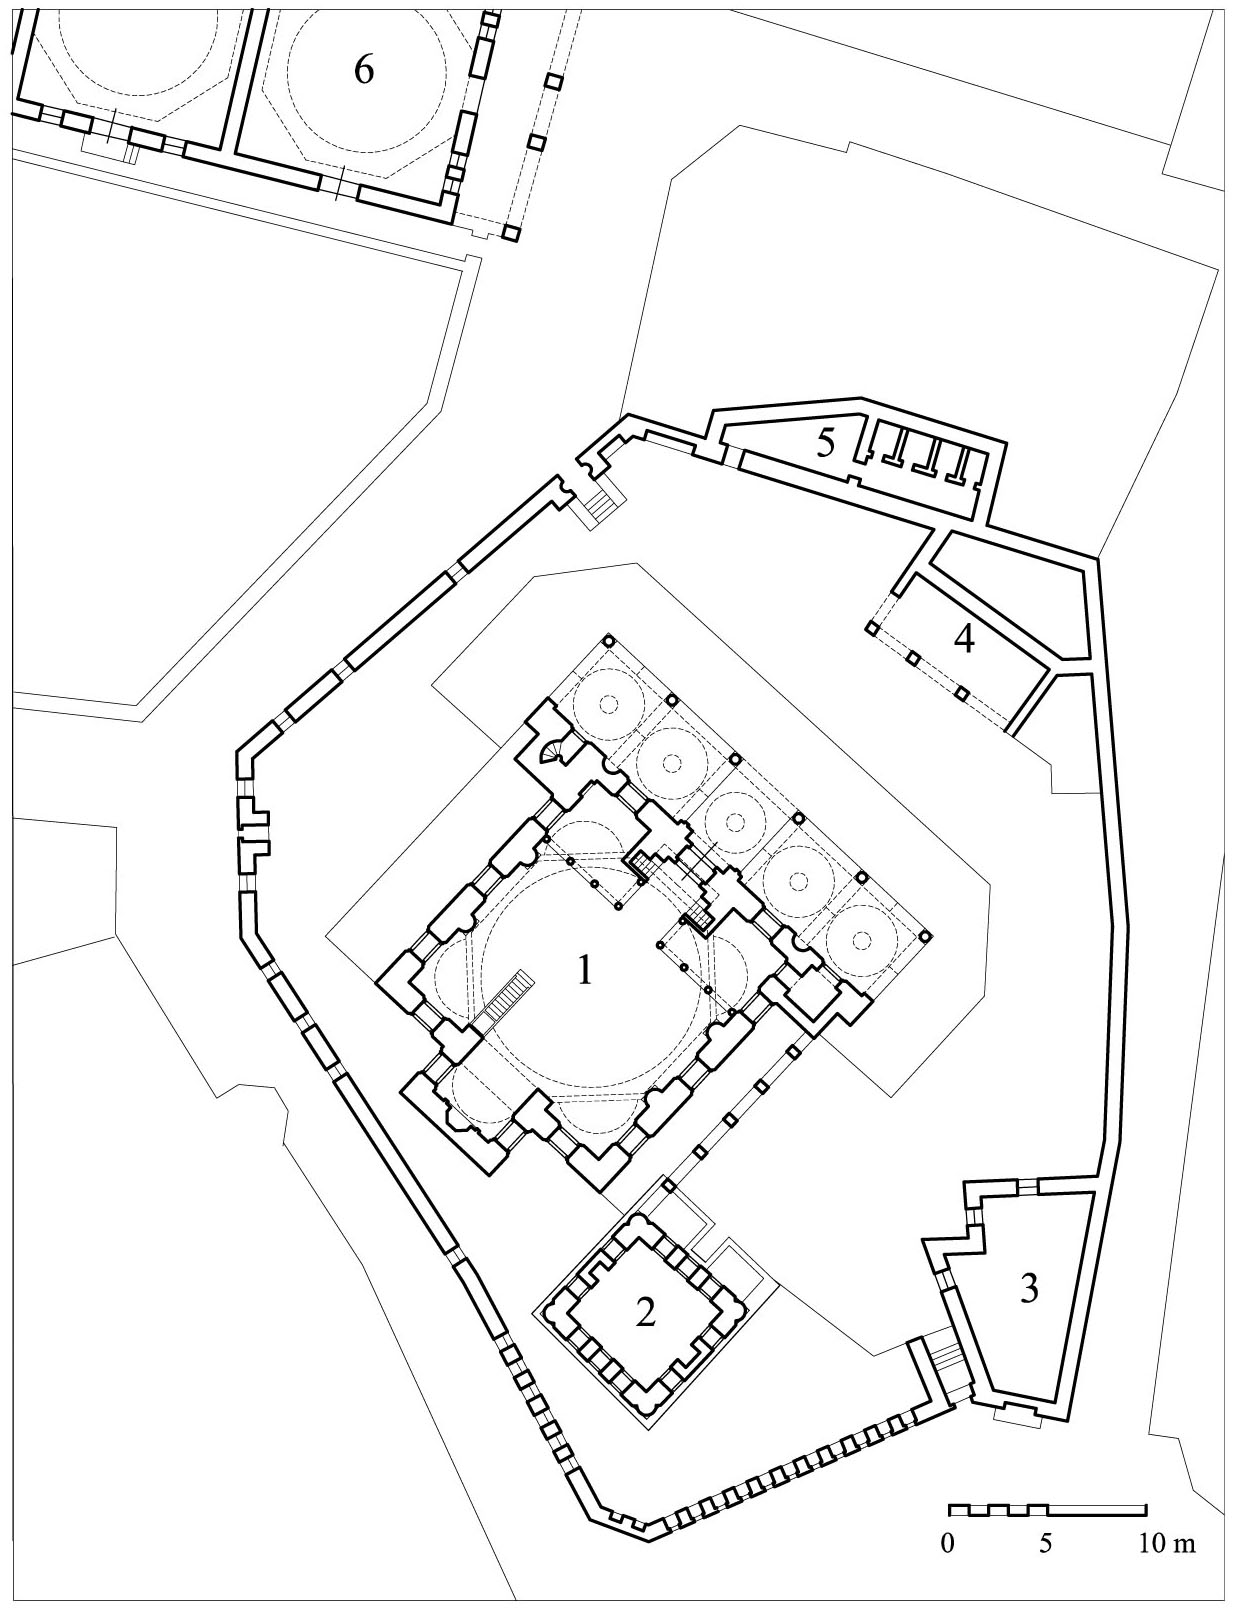 Floor plan of complex showing (1) mosque, (2) mausoleum, (3) site of the convent shaykh's house with street fountain next to precinct gate, (4) ablution fountains, (5) latrines, (6) double bath